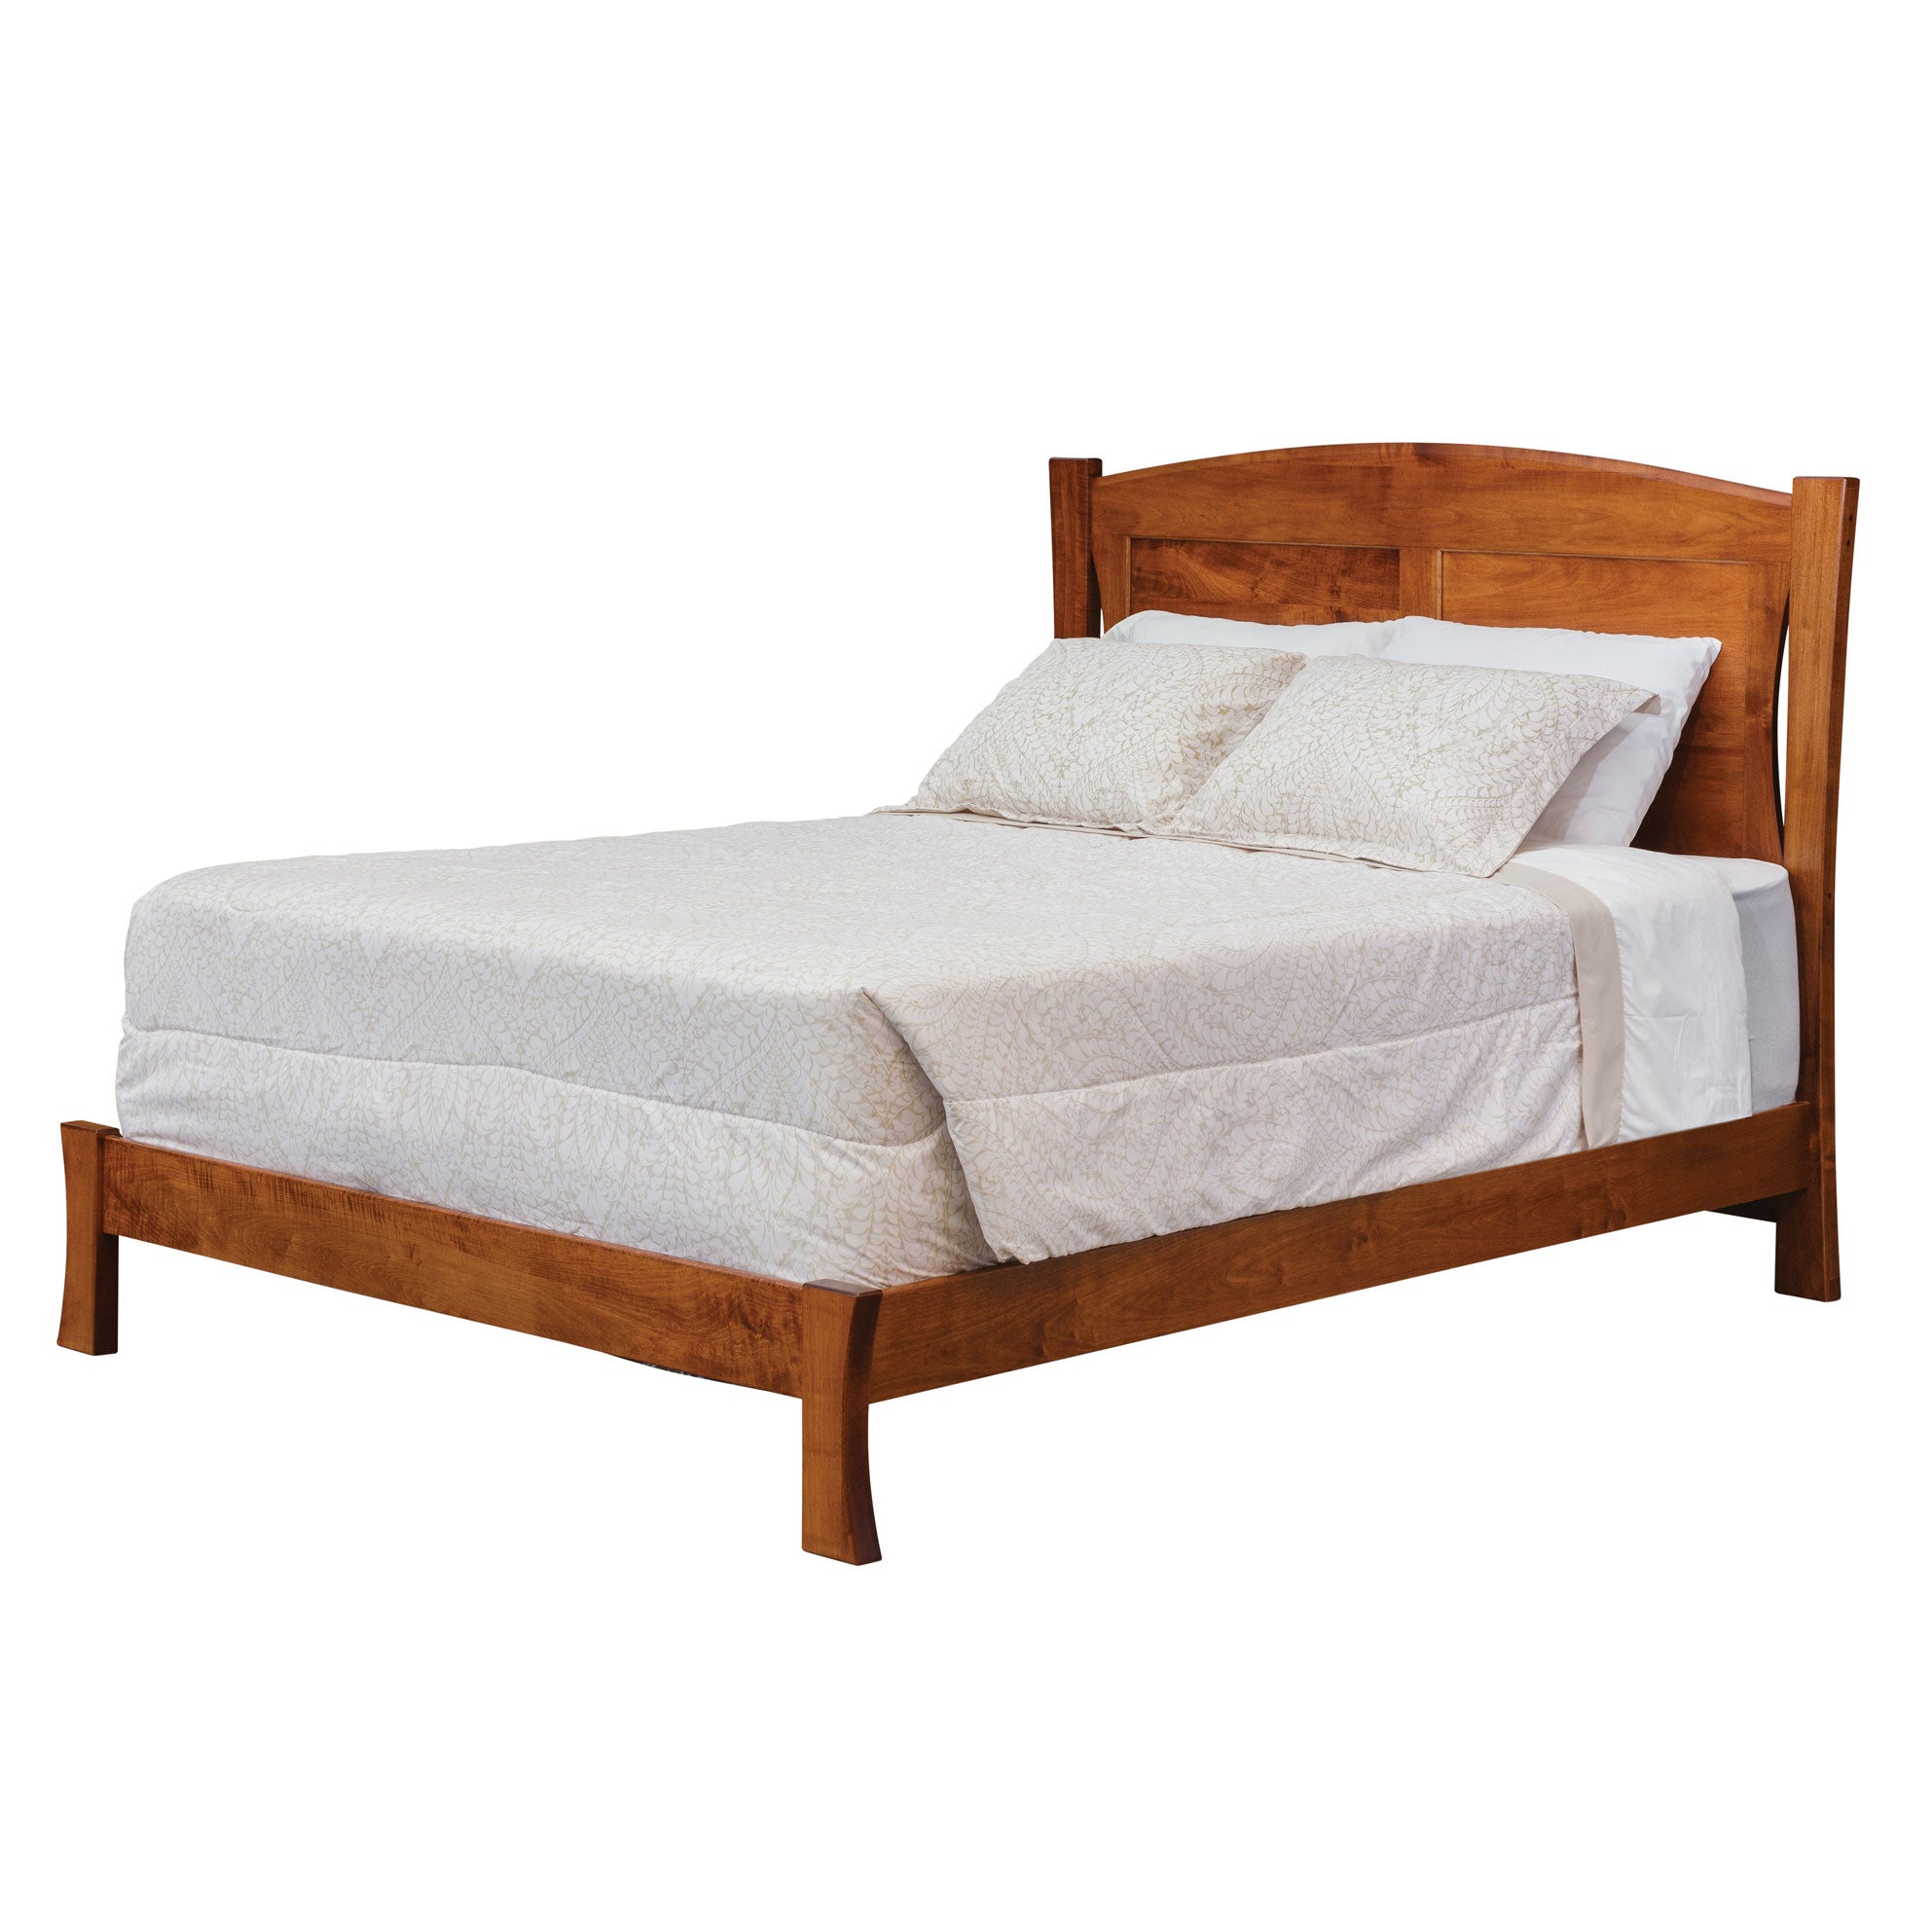 Manchester Amish Bed - snyders.furniture